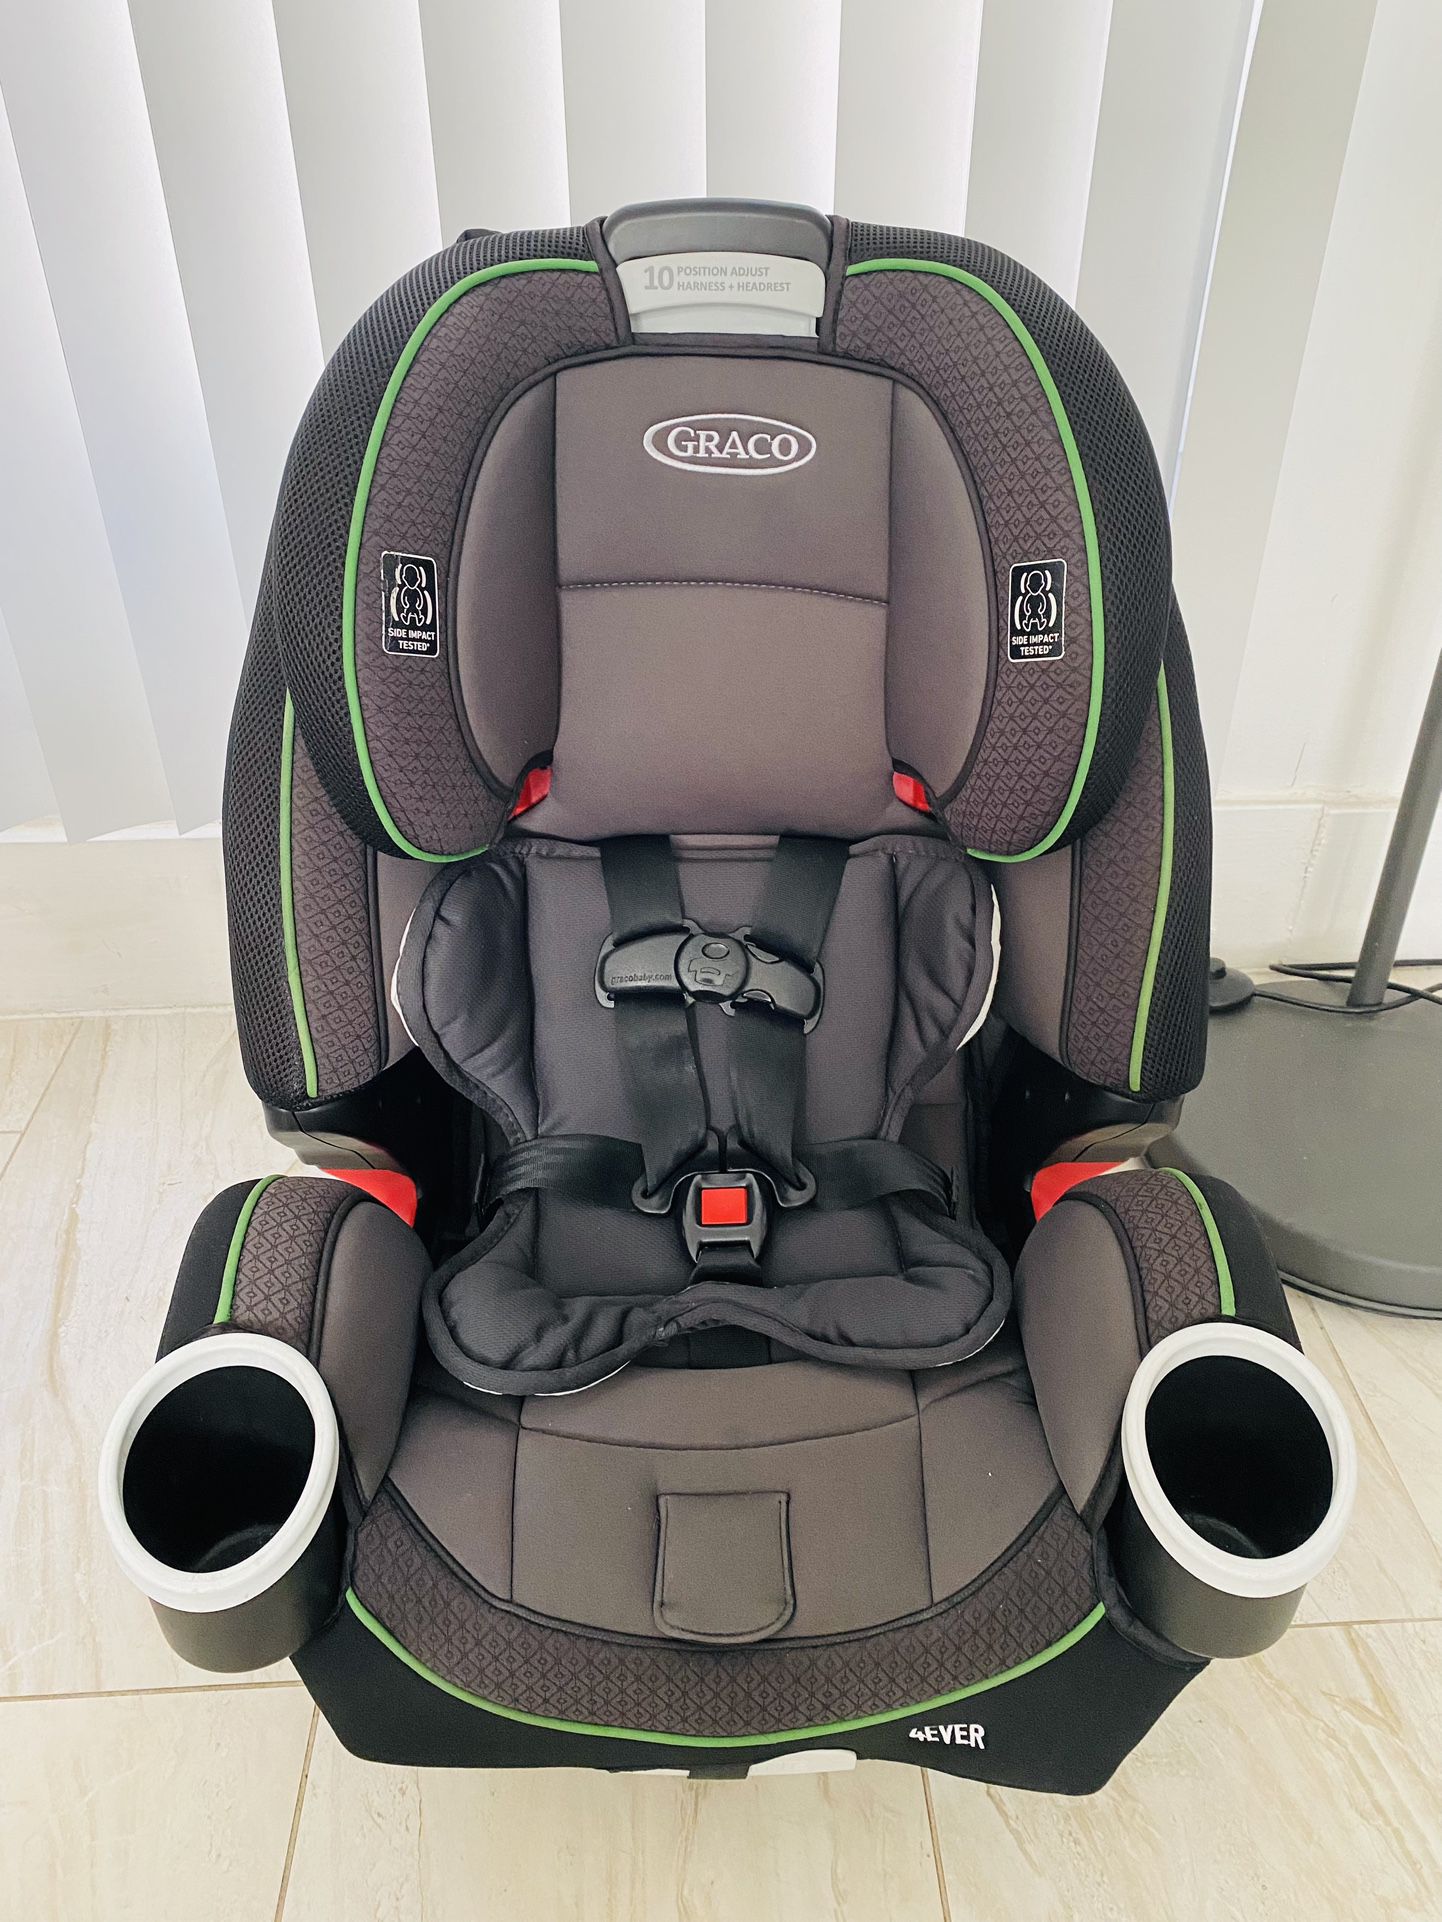 $65 GRACO CAR SEAT 4 Ever /10 Positions